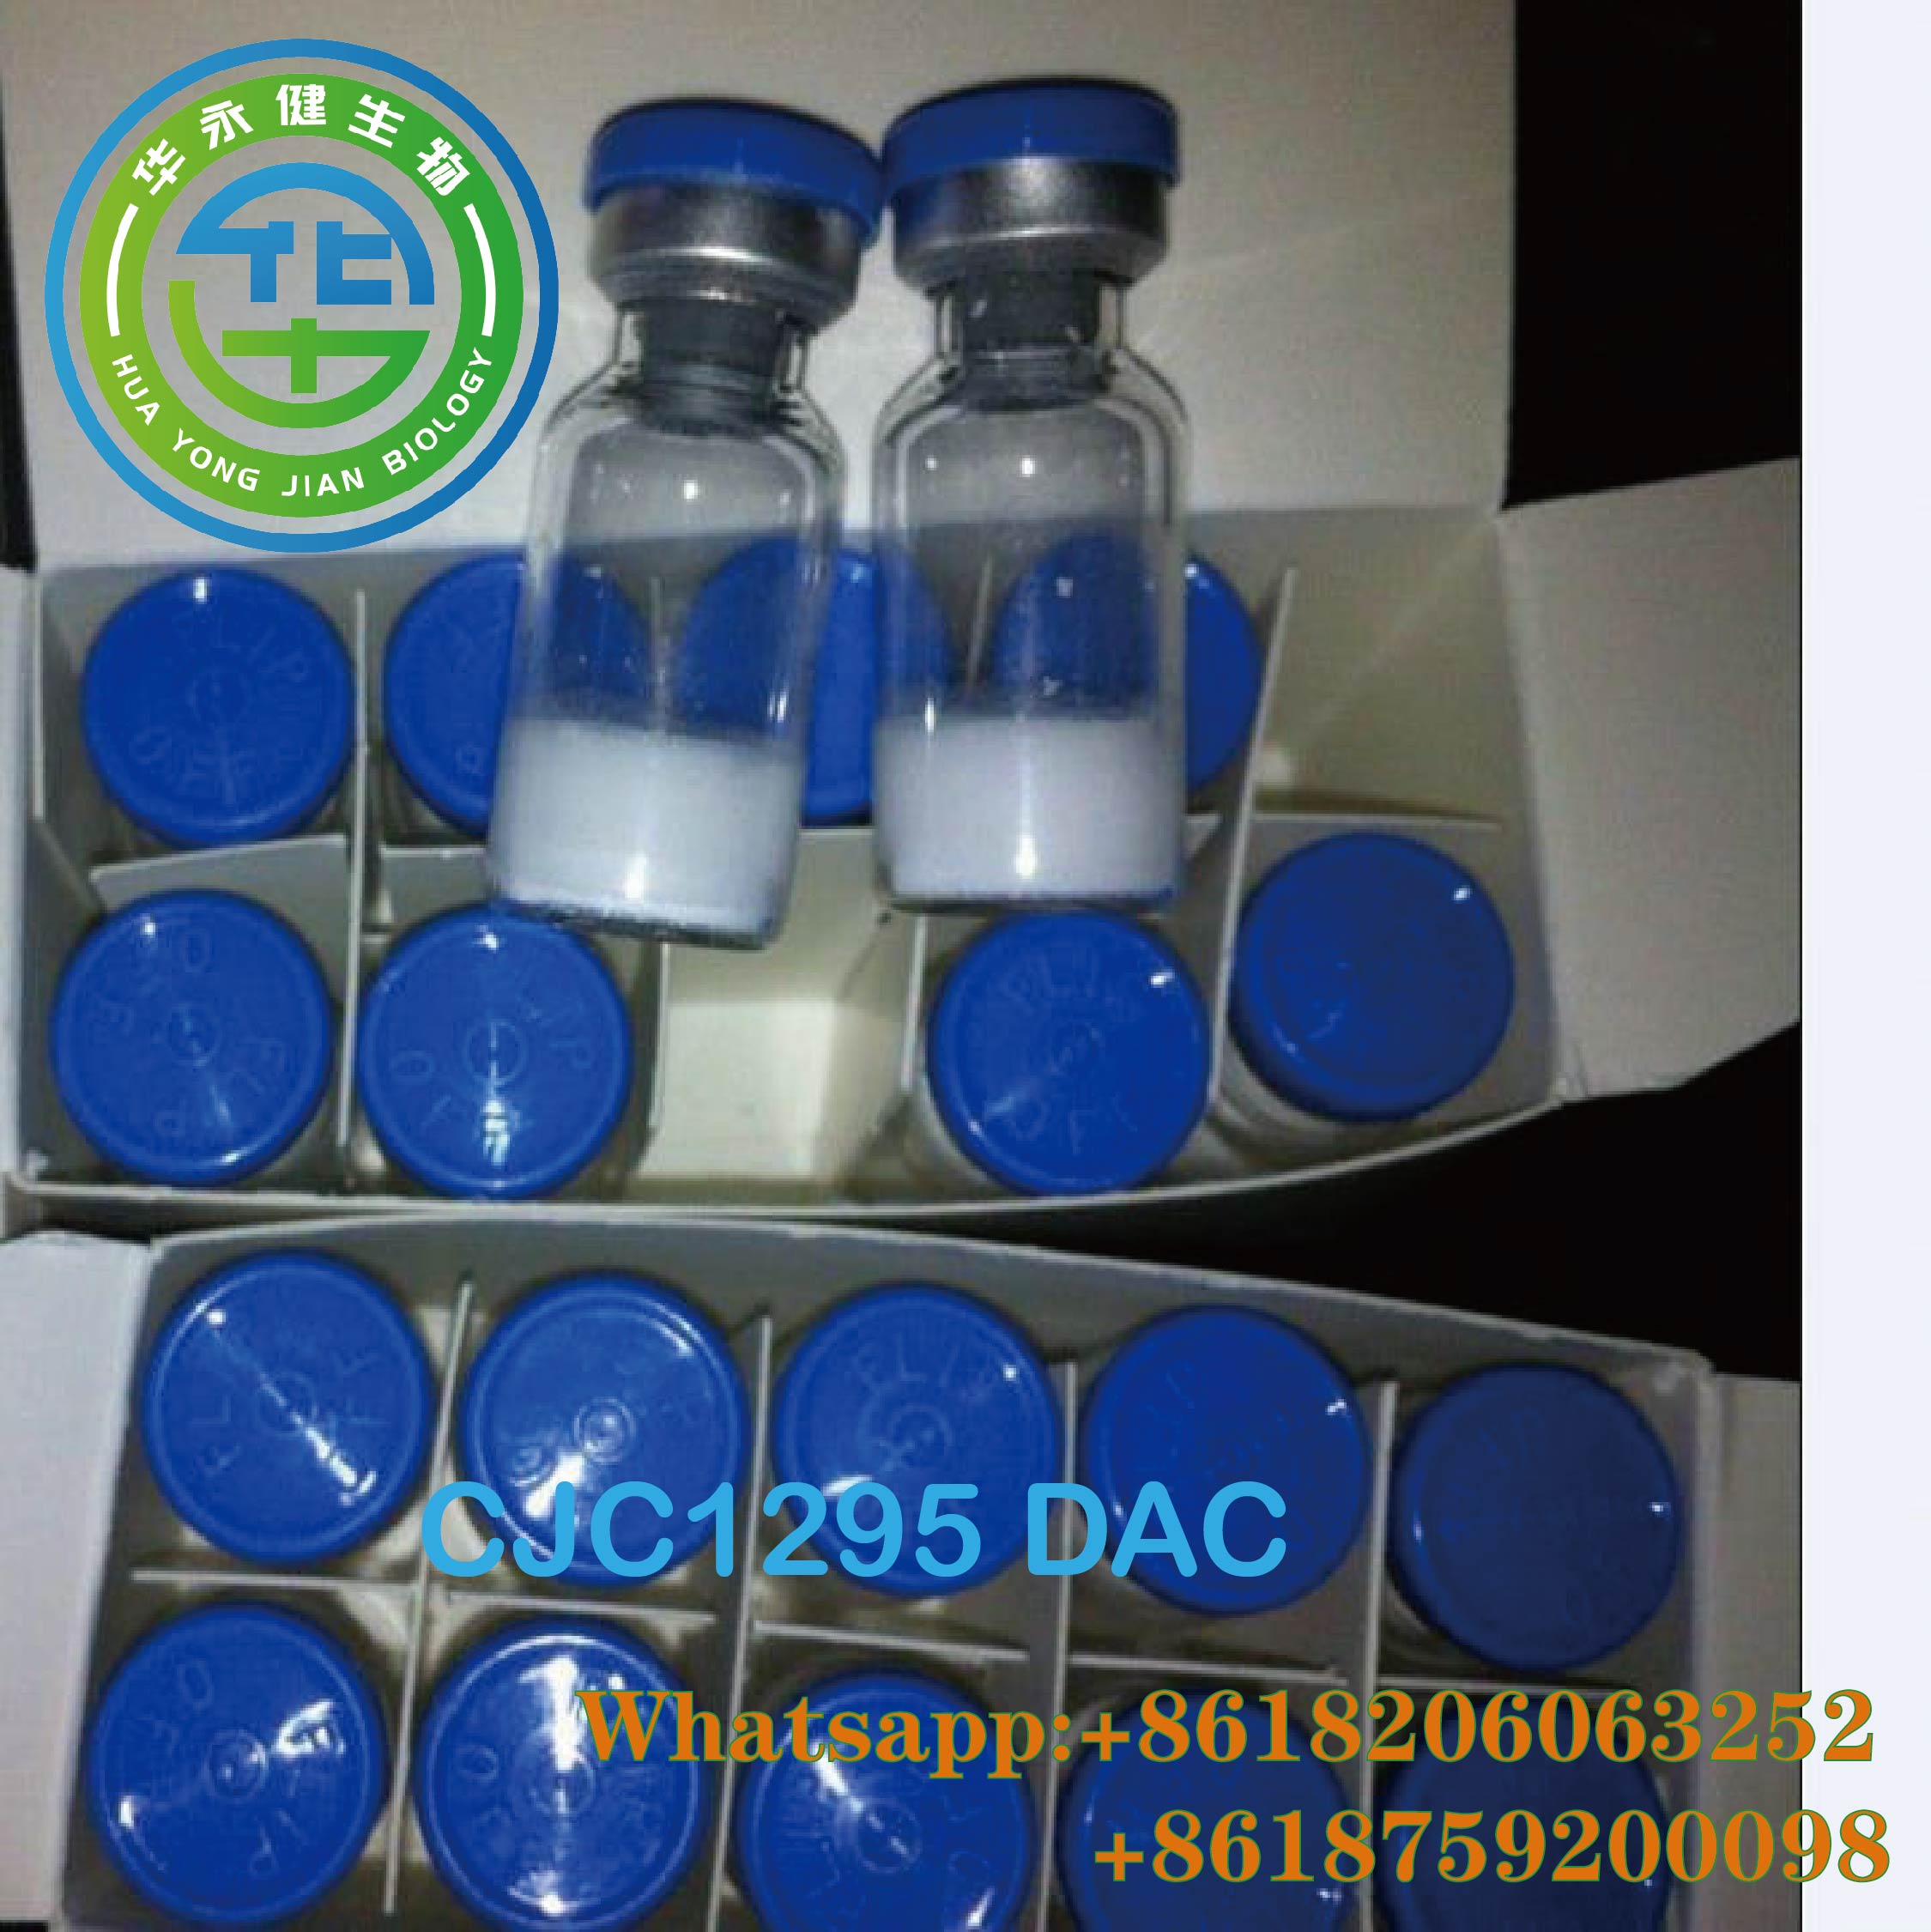 White powder CJC1295 DAC powerful Peptides for Bodybuilding growth muscle 